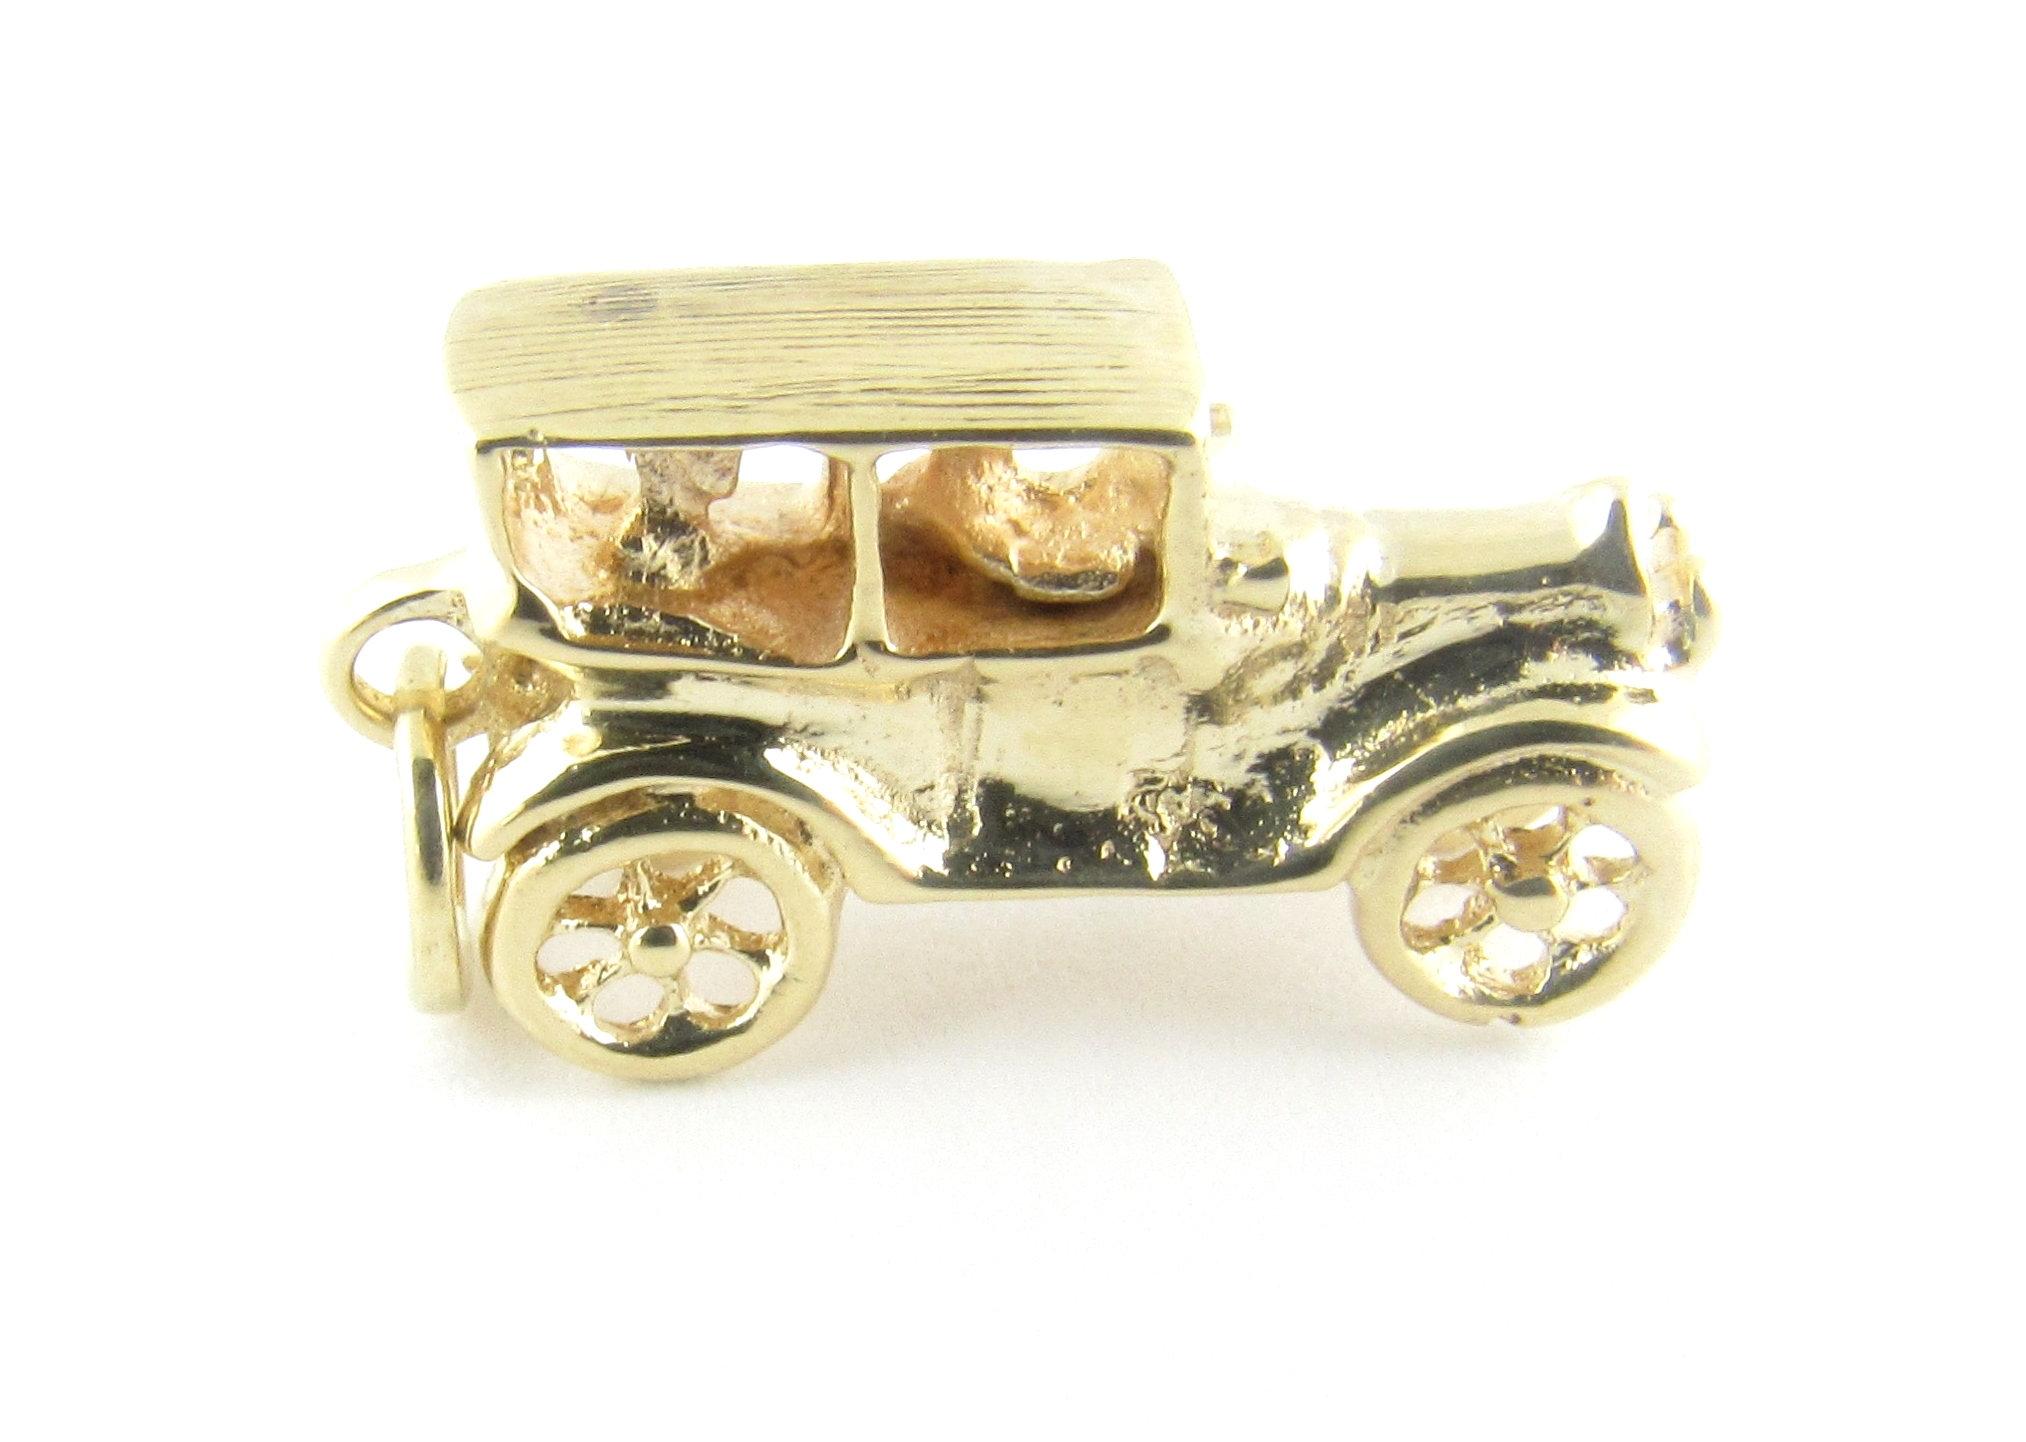 Vintage 14 Karat Yellow Gold Model T Ford Car Charm-

Perfect gift for the car enthusiast!

This 3D charm features a miniature Model T Ford Car meticulously detailed in 14K yellow gold.

Size: 11 mm x 19 mm (actual charm)

Weight: 2.1 dwt. / 3.4